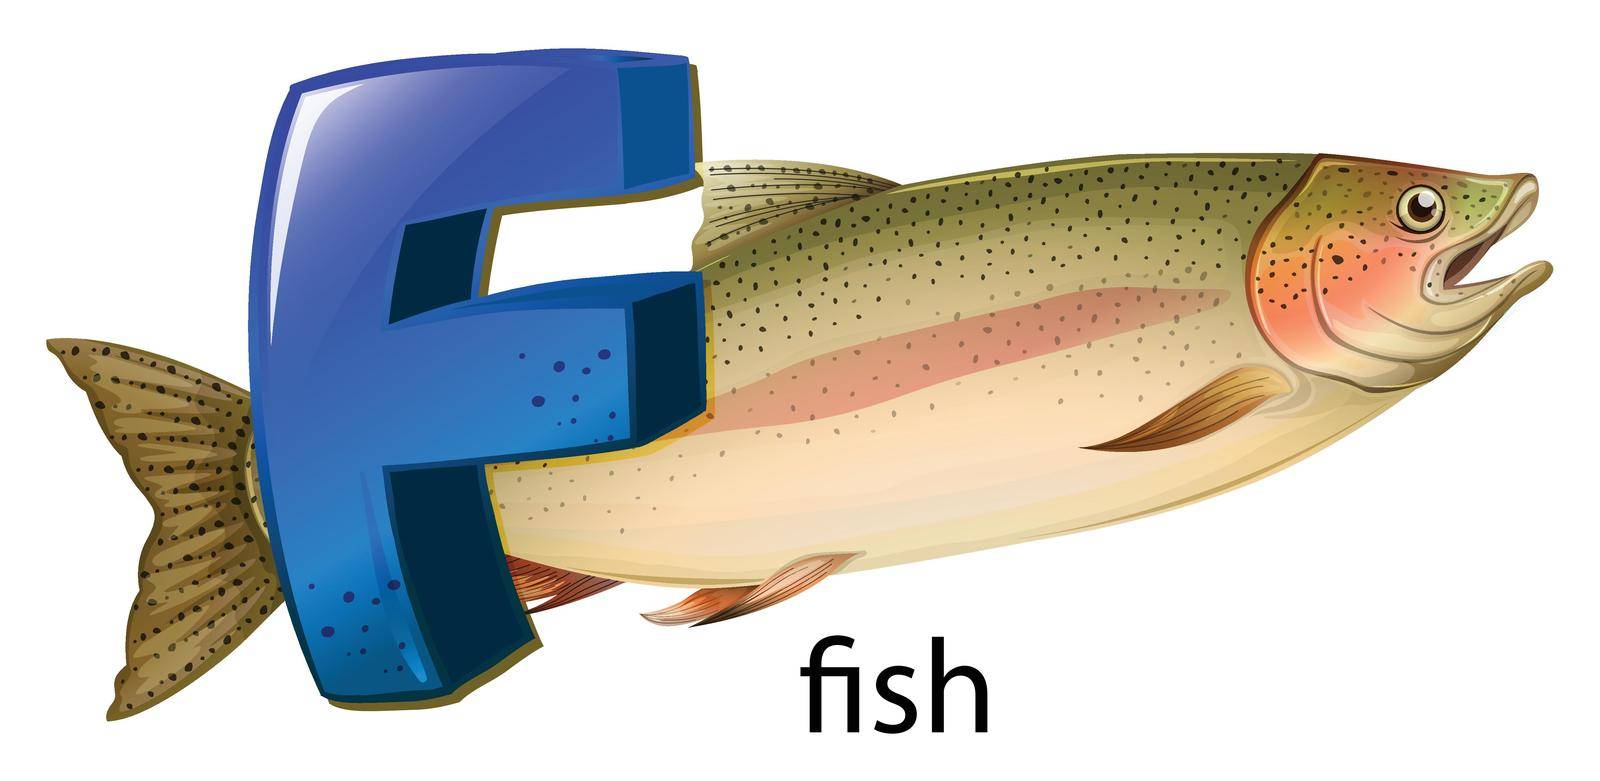 Illustration of a letter F for fish on a white background